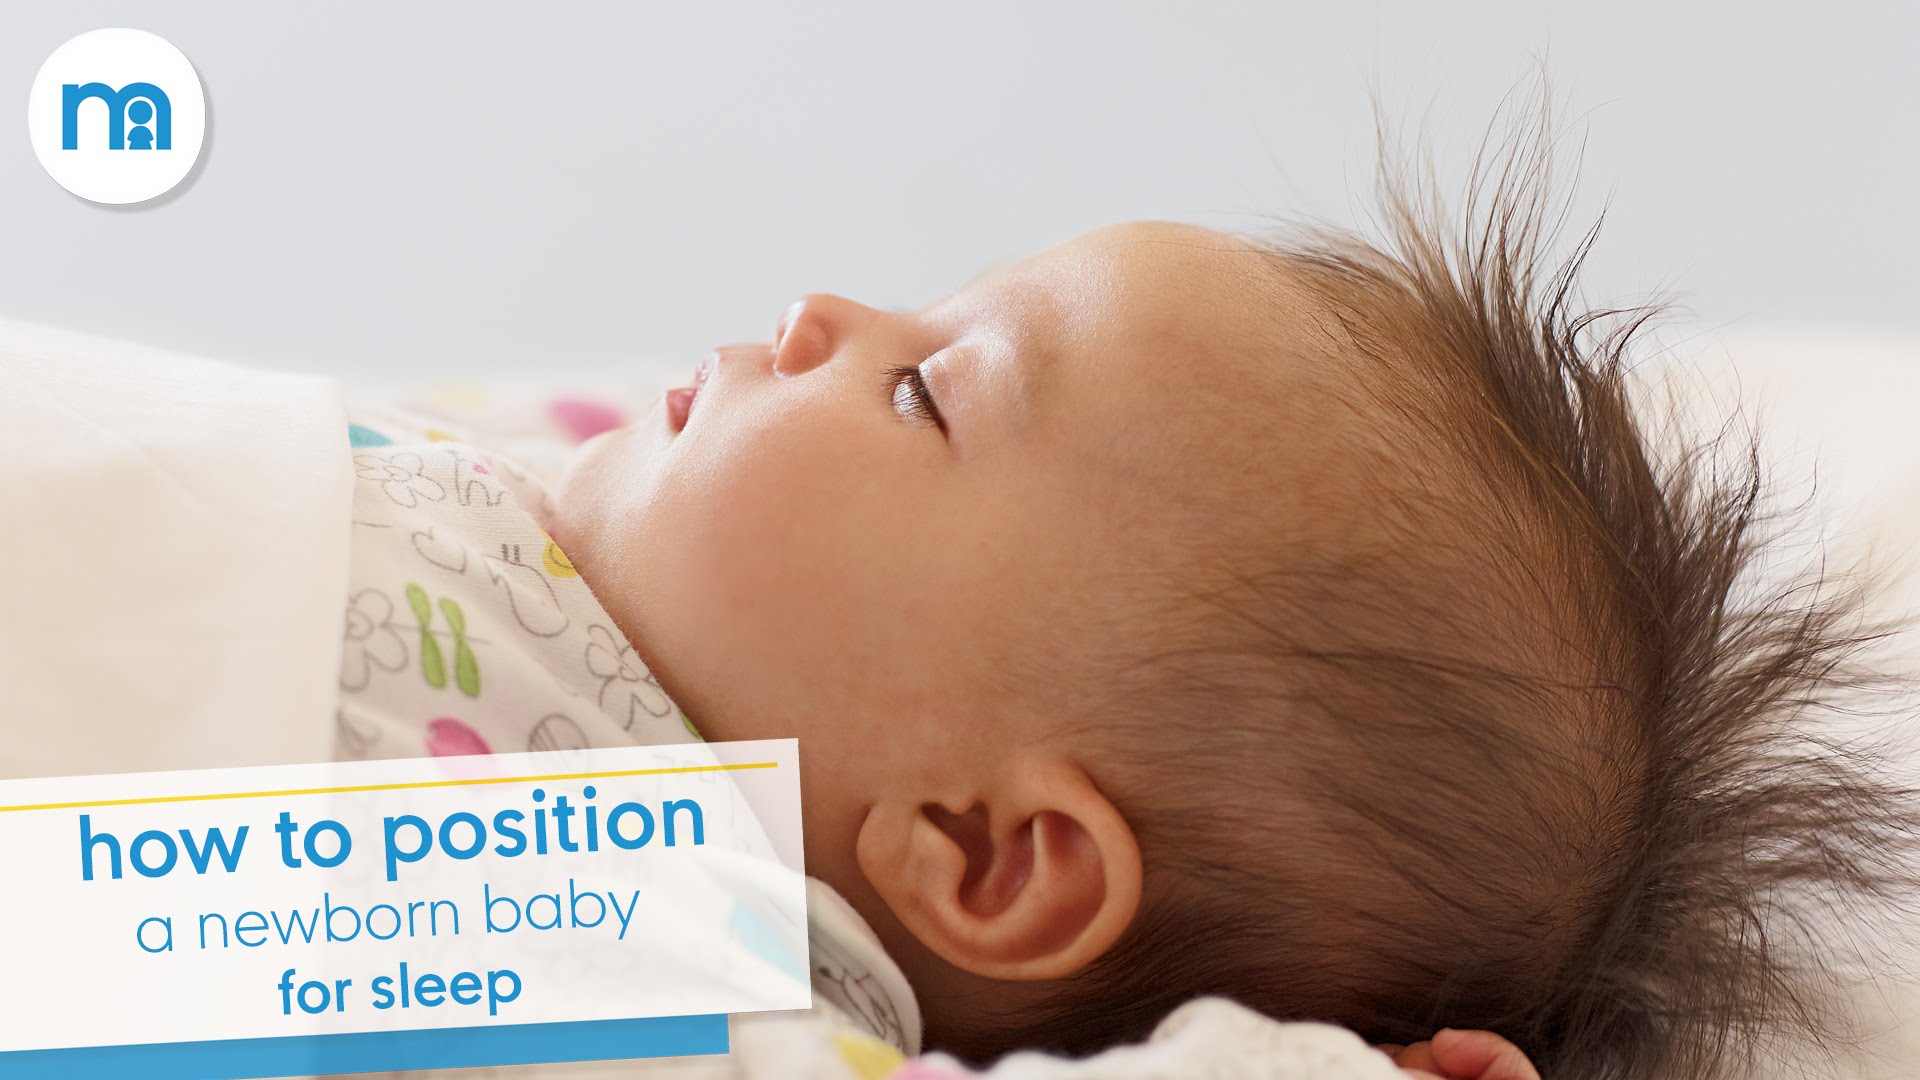 Study says many parents put infants to sleep in dangerous positions